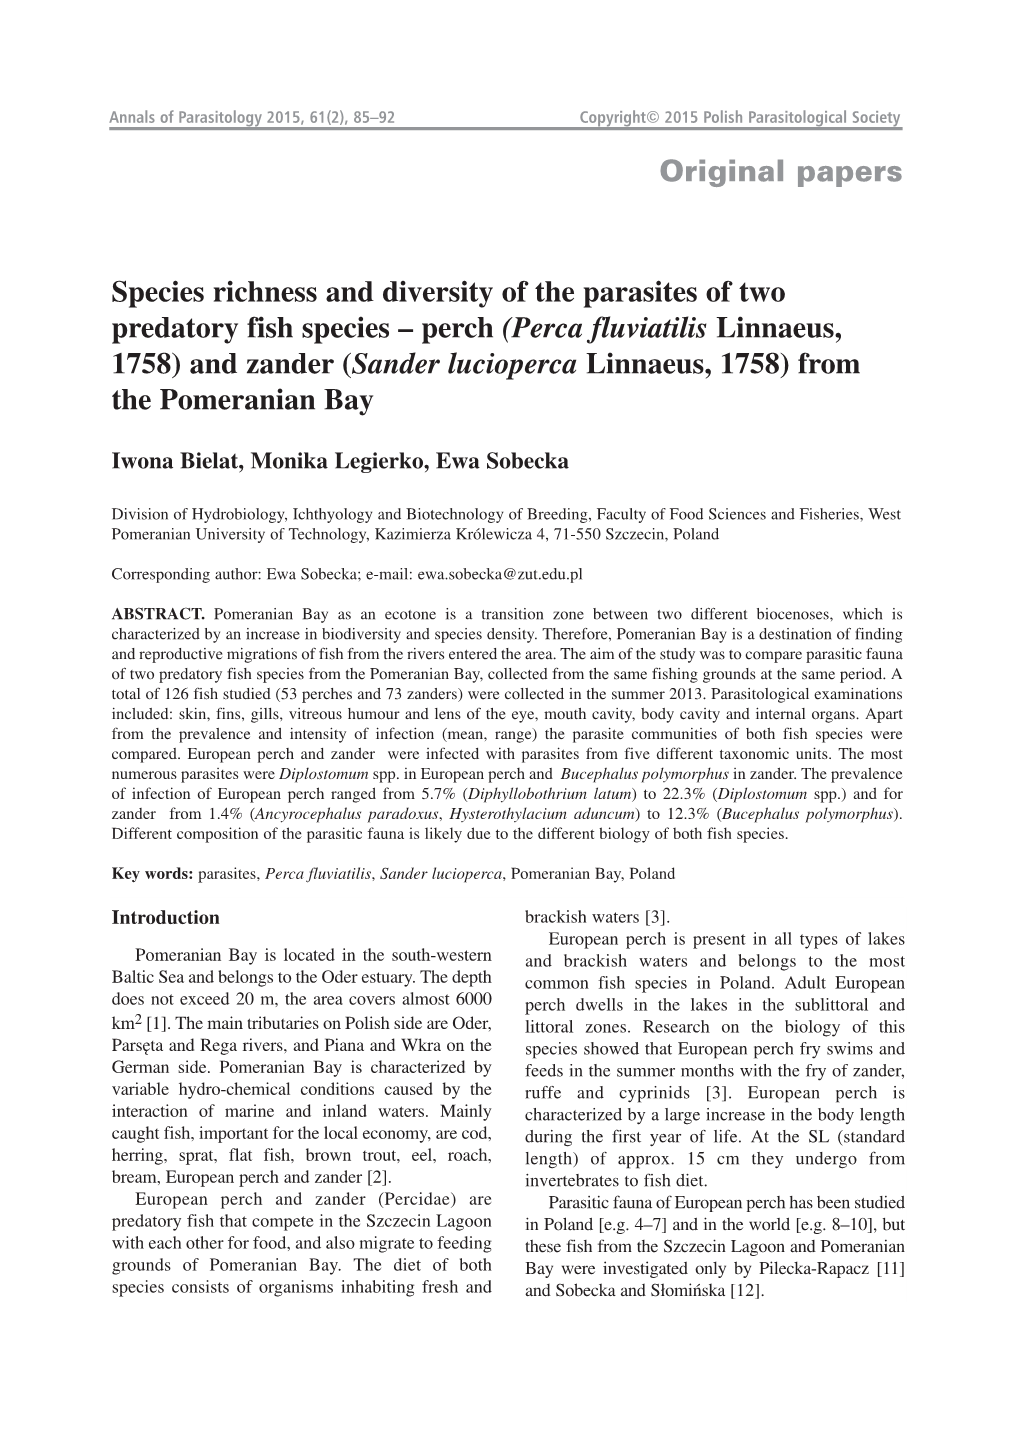 Original Papers Species Richness and Diversity of the Parasites of Two Predatory Fish Species – Perch (Perca Fluviatilis Linna